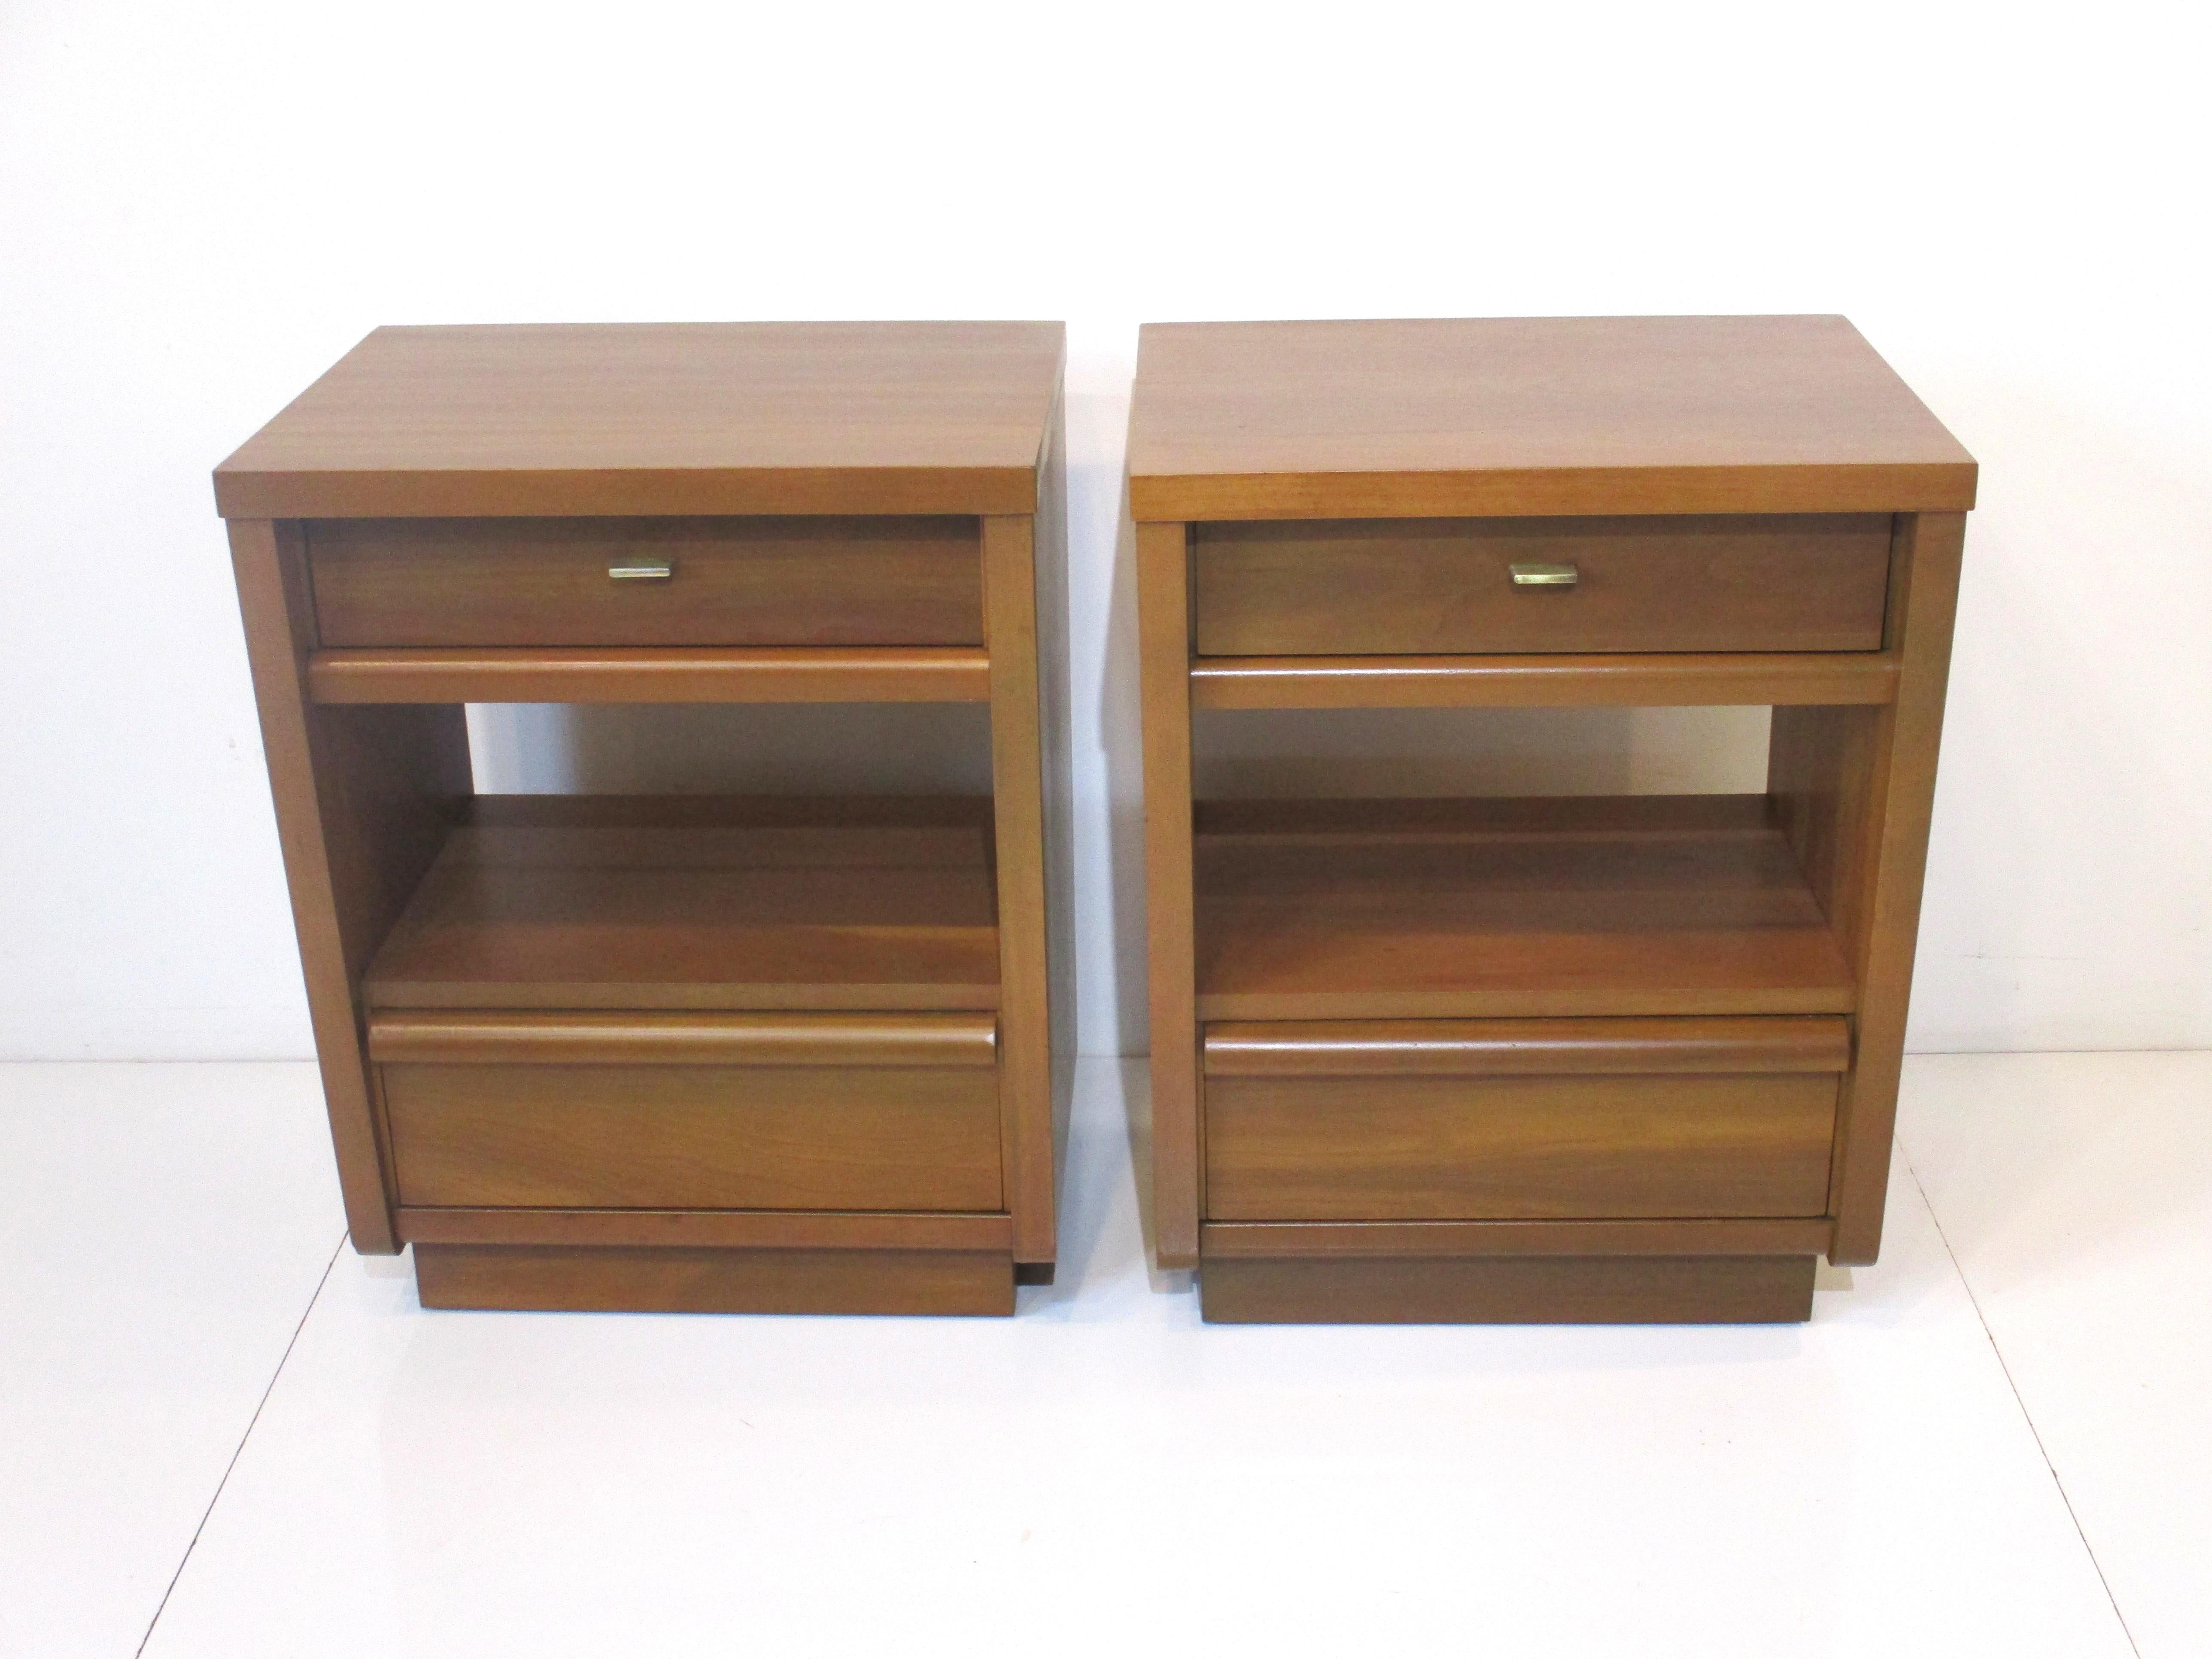 A pair of medium mahogany mid century nightstands with upper and lower drawers and storage to the mid section . A thin brass pull and tapered sides give the piece great style and a lighter feel designed and made in the manner of the Widdicomb